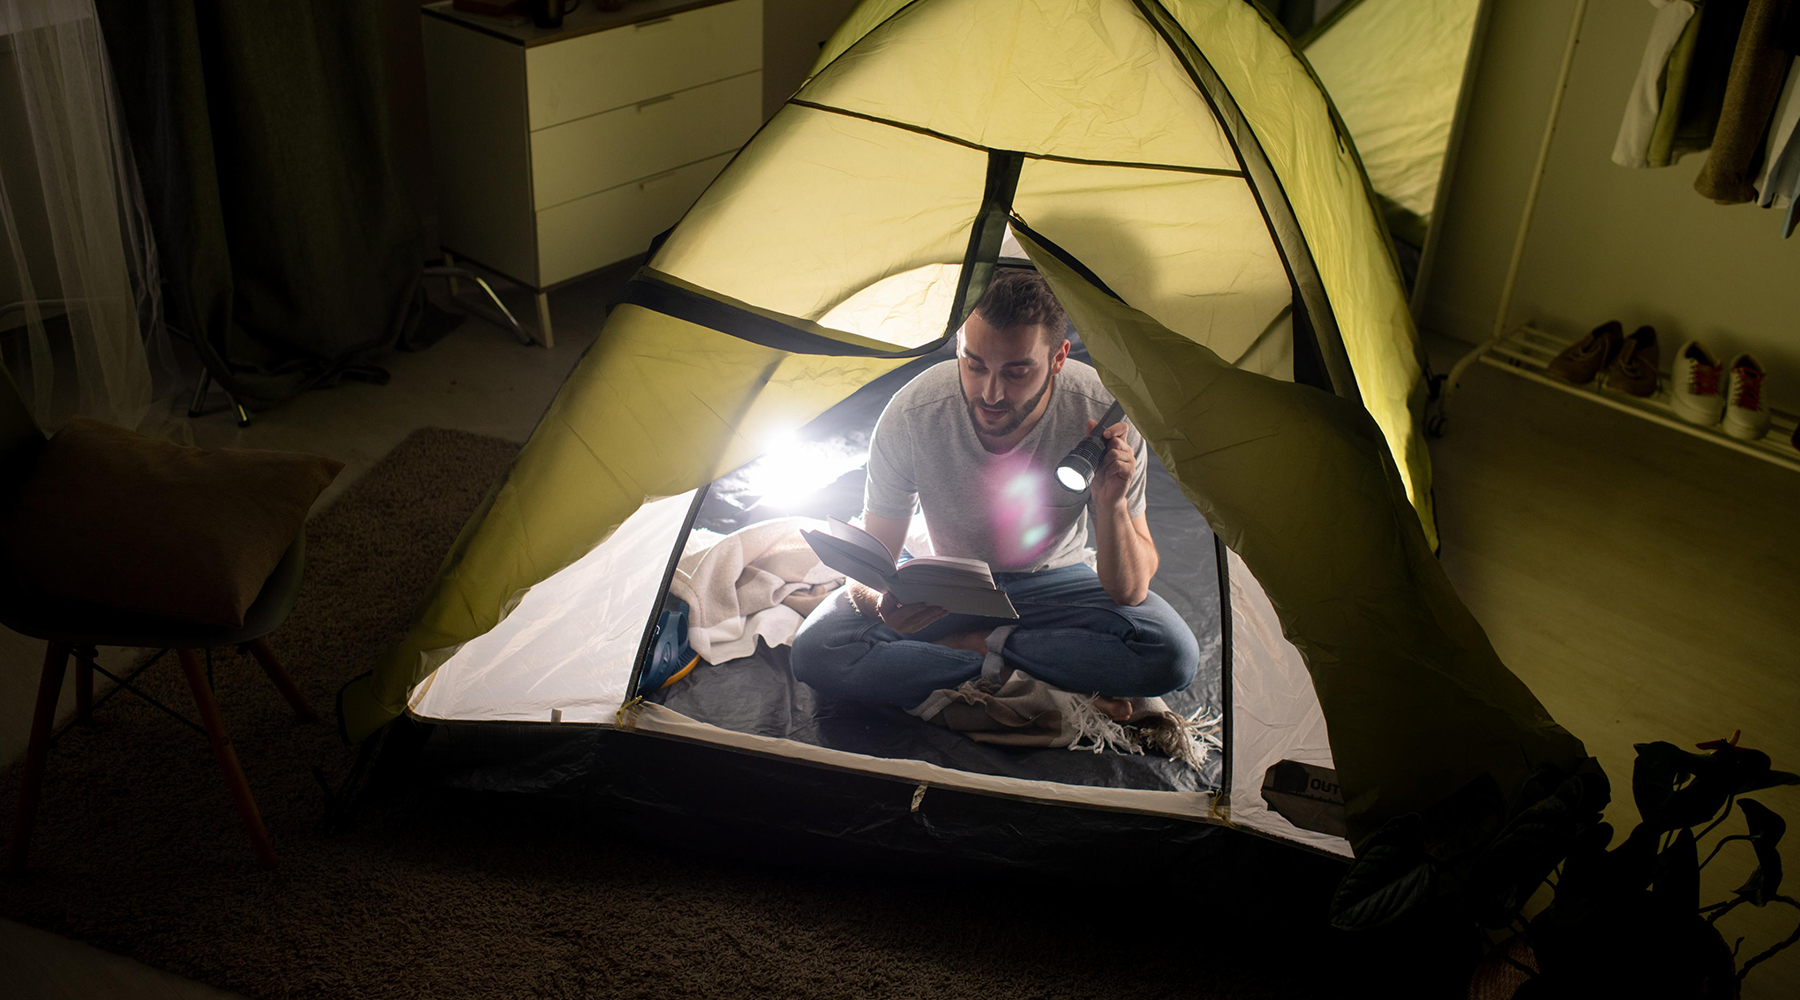 How to choose the best lights for camping